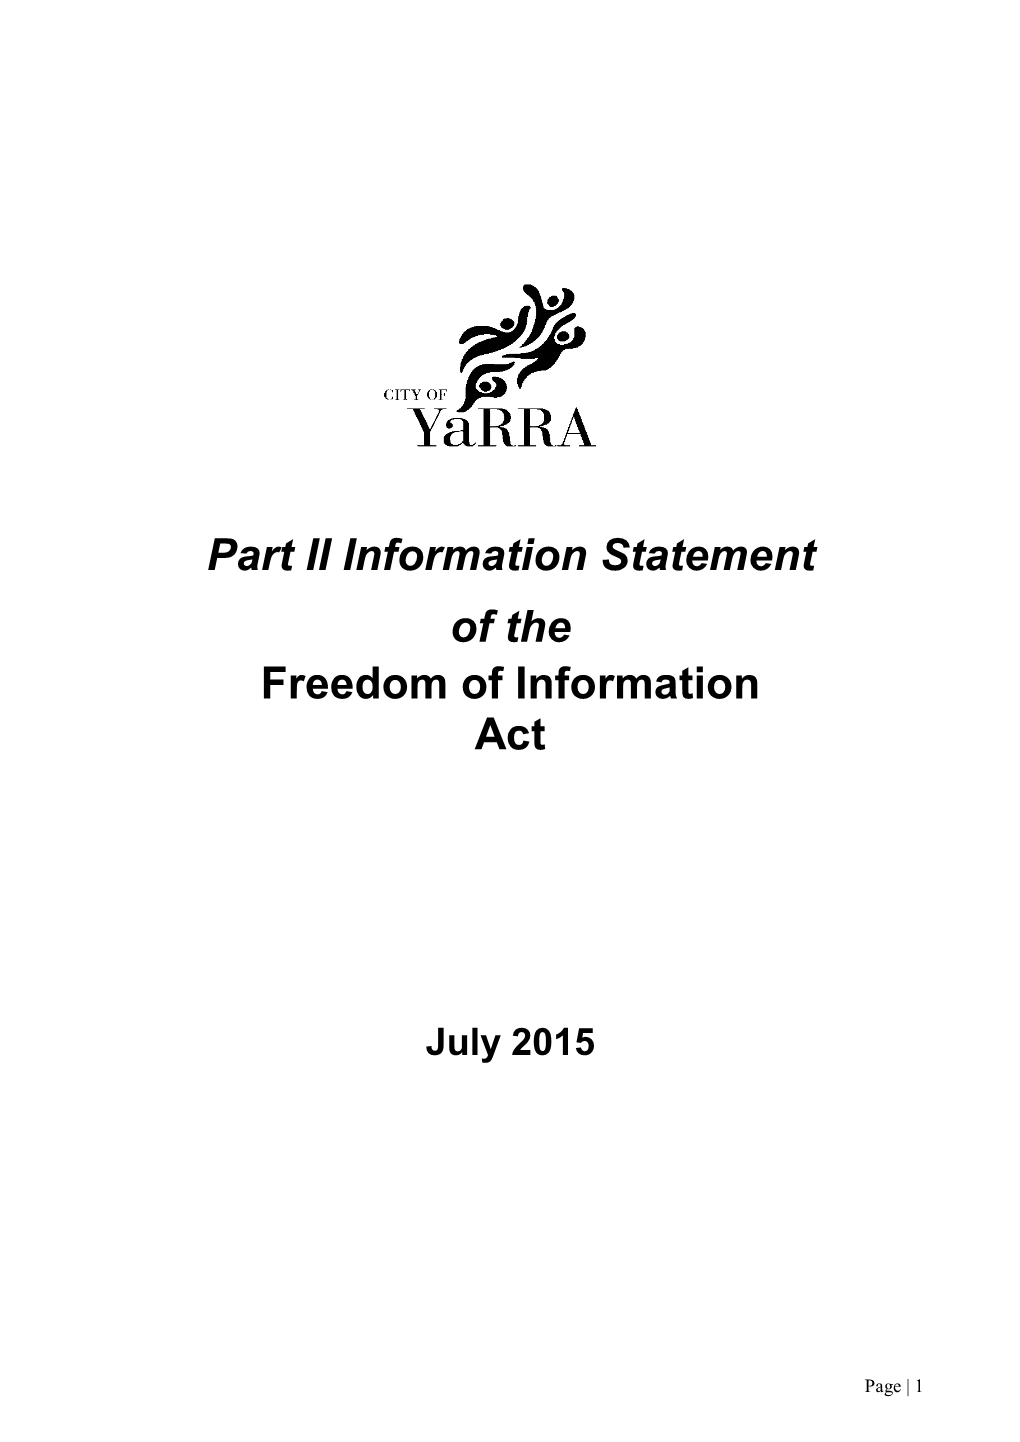 Part II Information Statement of the Freedom of Information Act